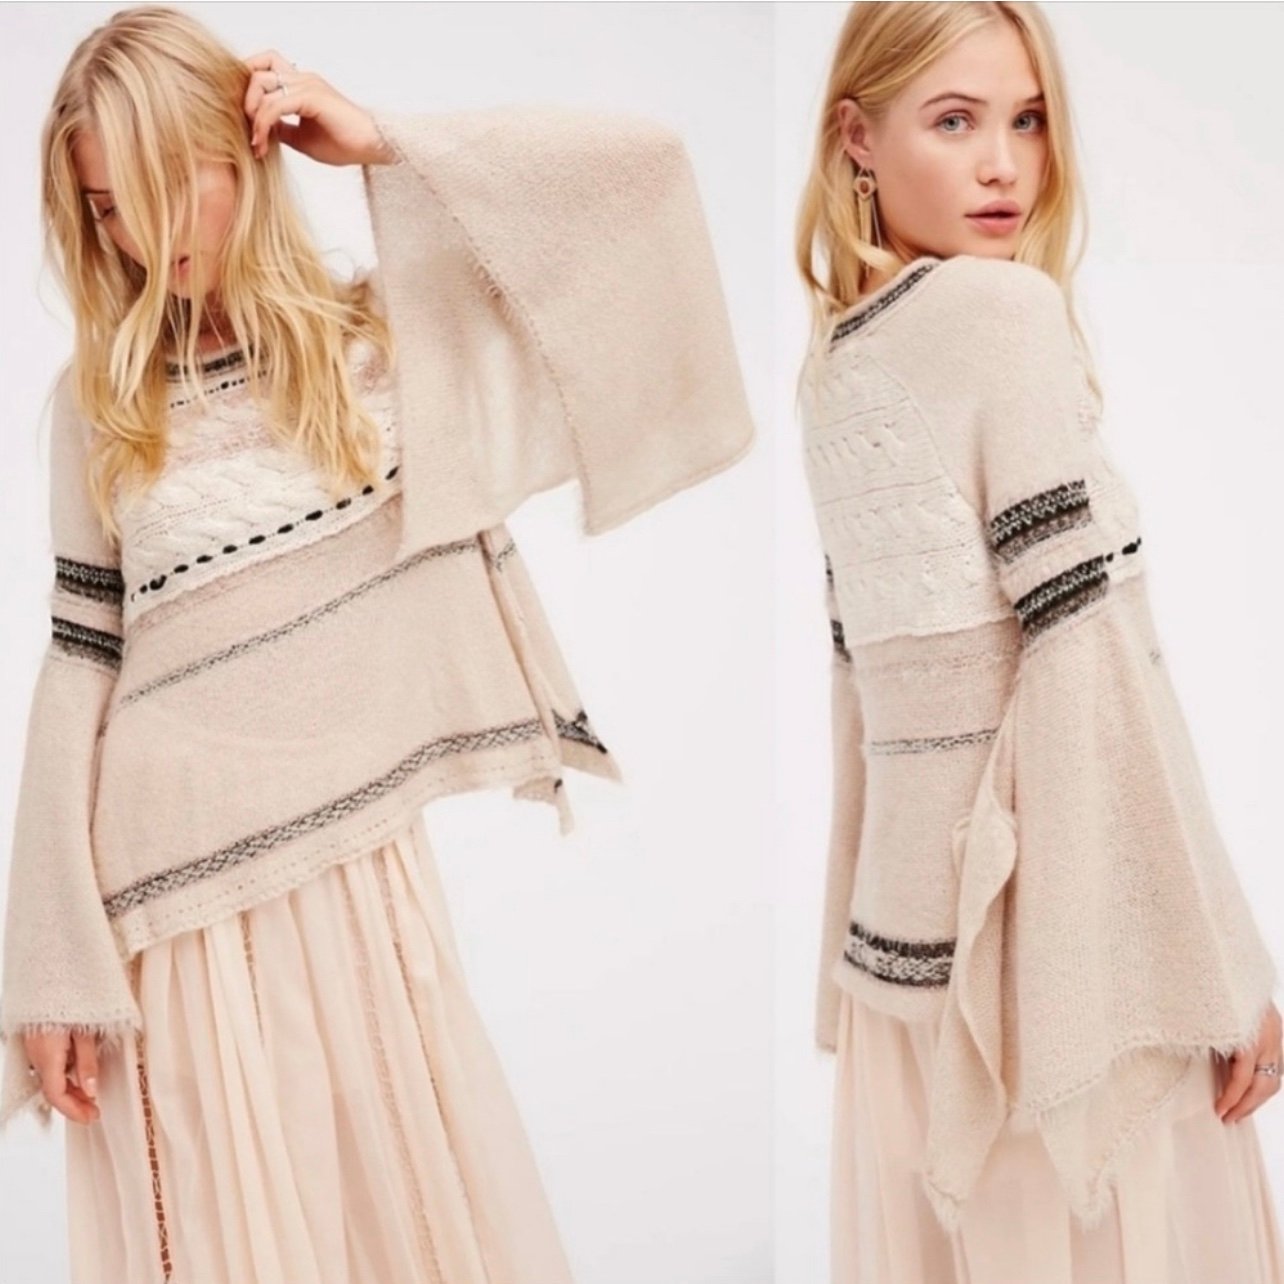 Exclusive Free People Craft Time Bell Sleeve Knit Ivory Sweater LJib6Ckh2 Factory Price